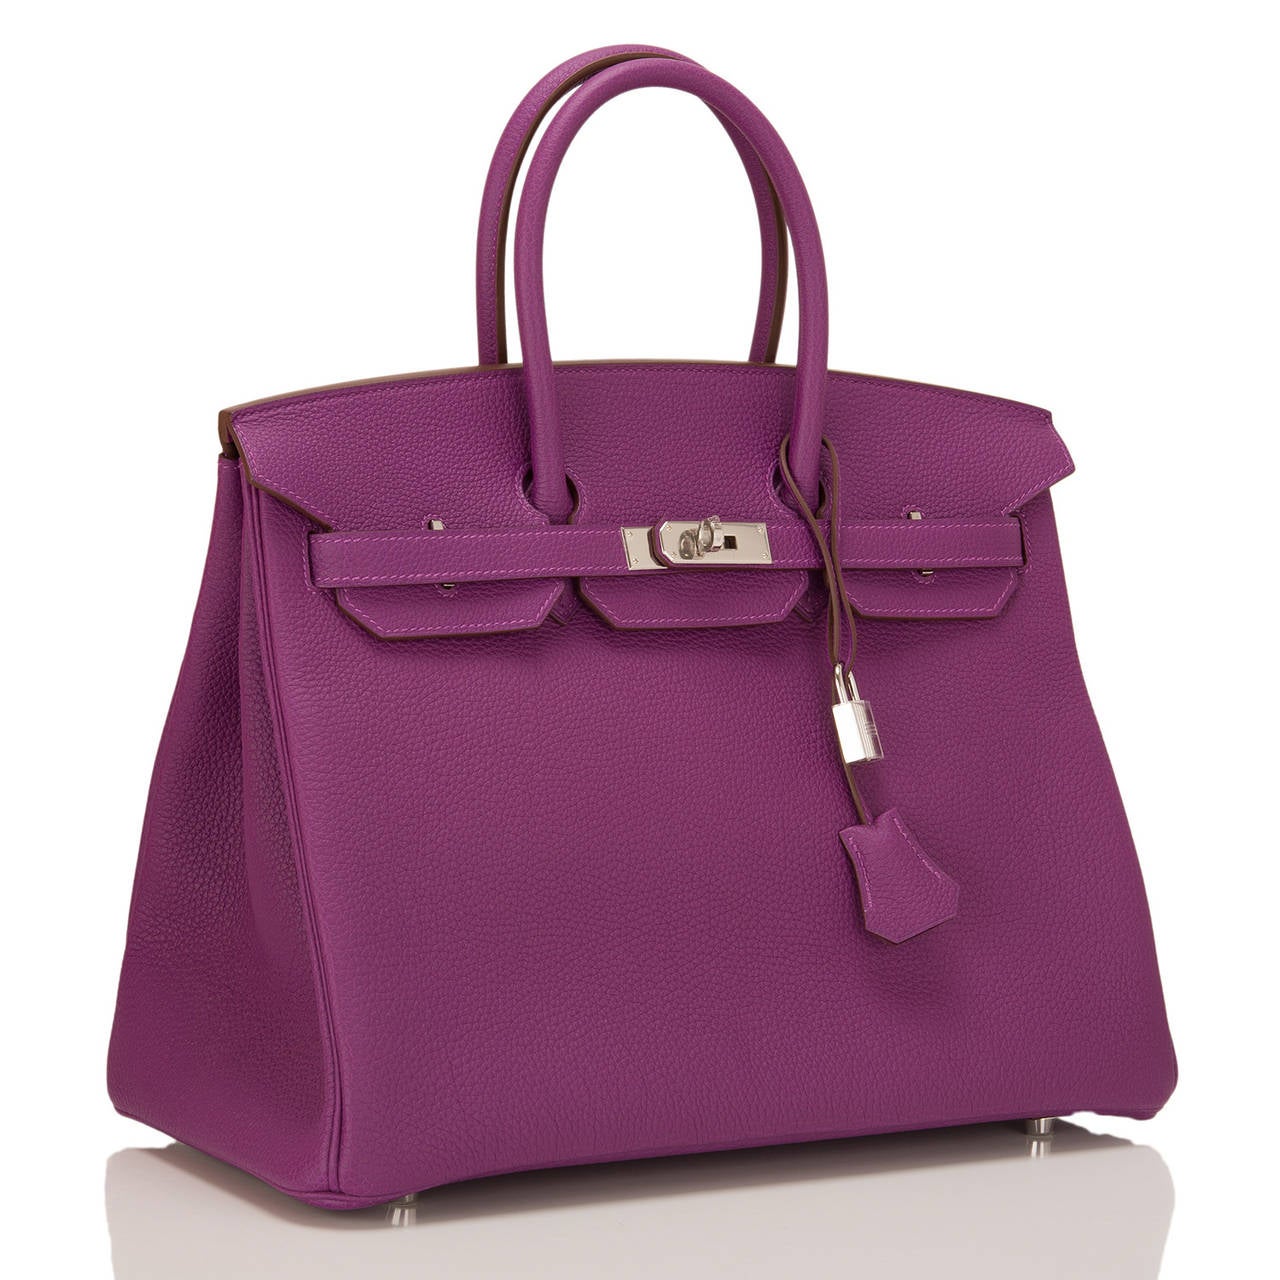 Hermes Anemone Birkin 35cm in togo (bull) with palladium hardware.

This Birkin features tonal stitching, front toggle closure, clochette with lock and two keys, and double rolled handles. The interior is lined in Anemone chevre with one zip